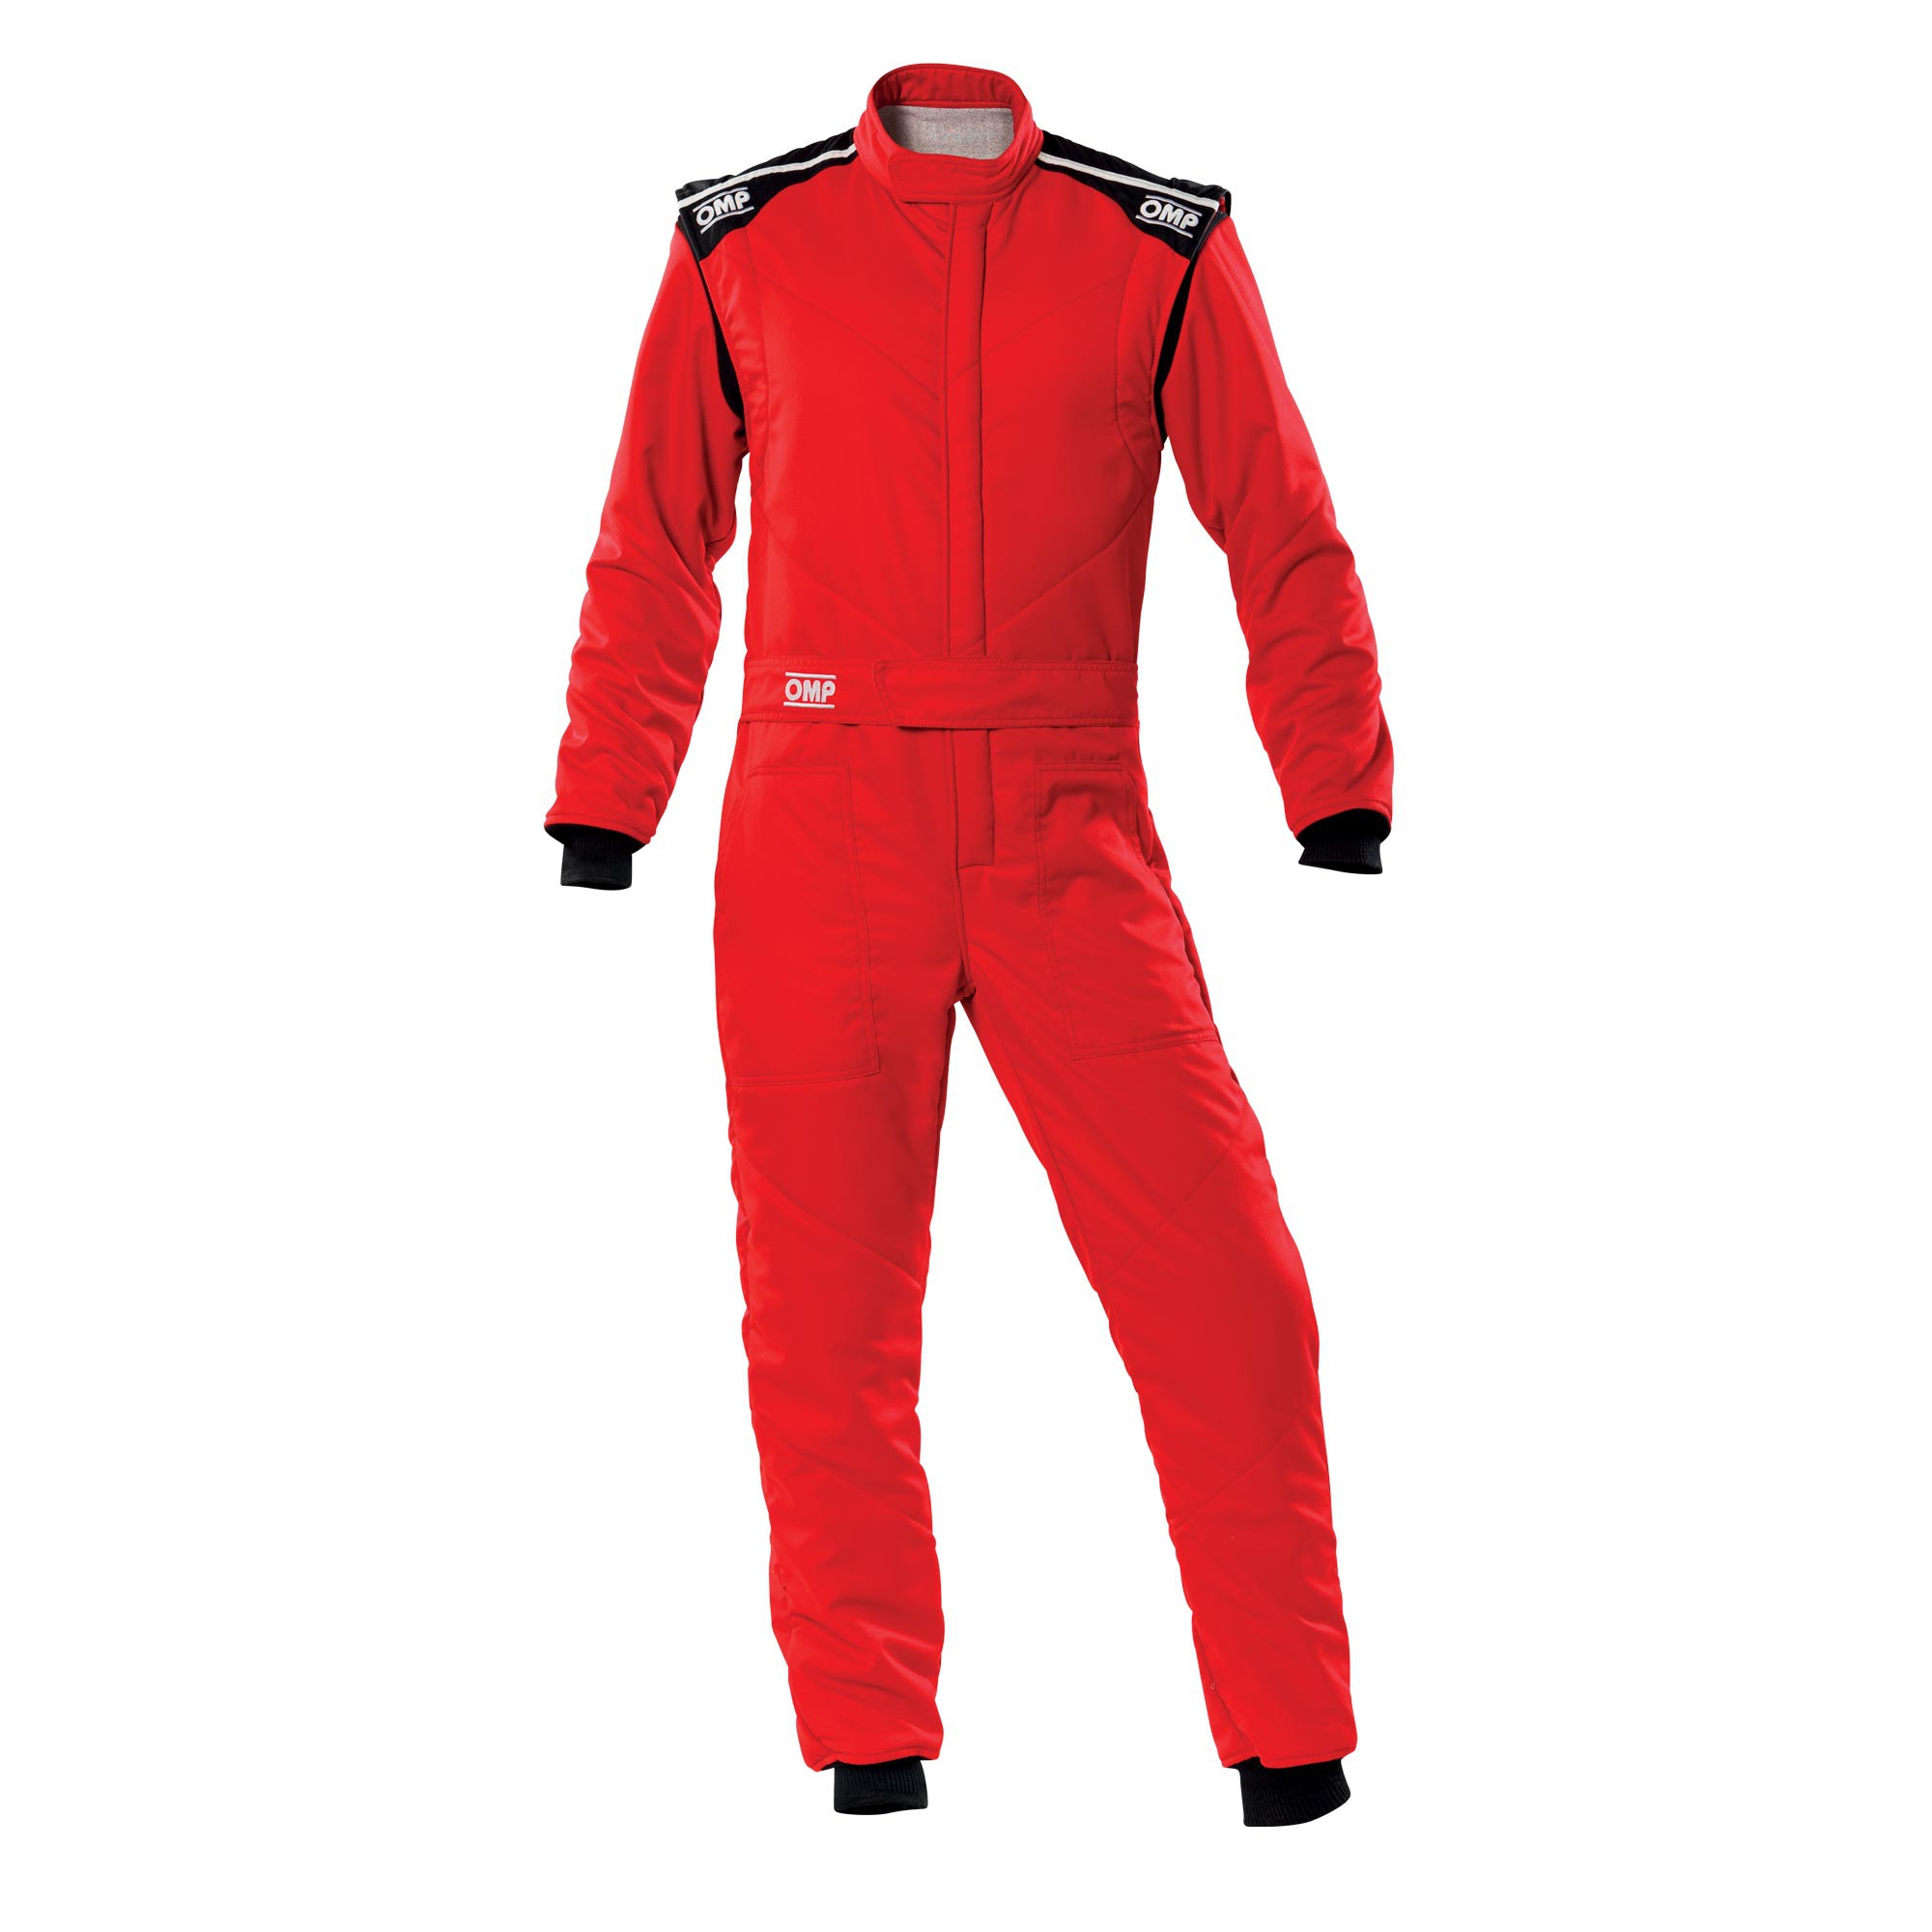 FIRST-S OVERALL RED SIZE 44 FIA 8856-2018